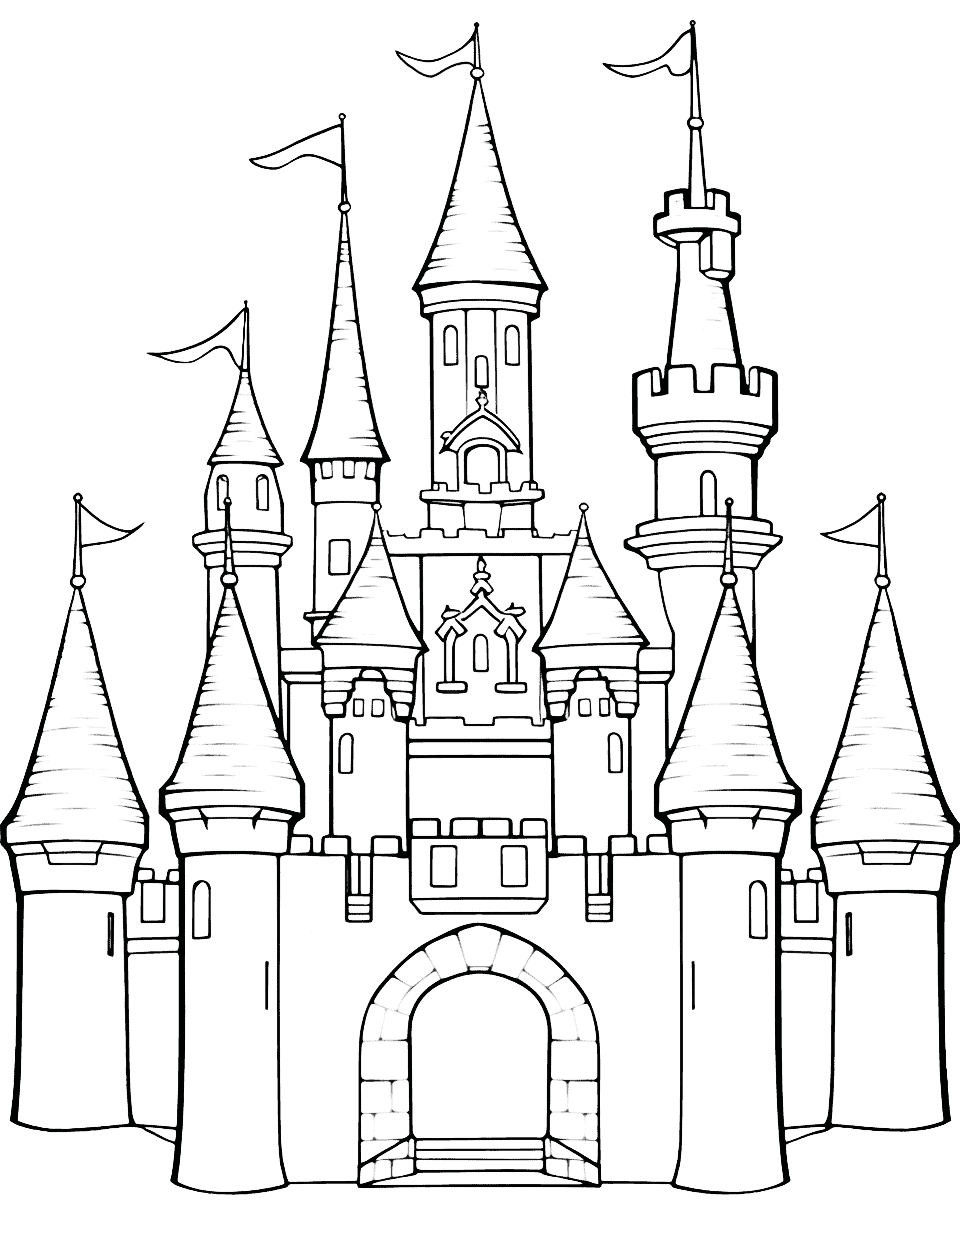 Disney Princess Castle Cute Coloring Page - A beautiful Disney-themed castle with tall towers, thick stone walls, and pointy rooftops.